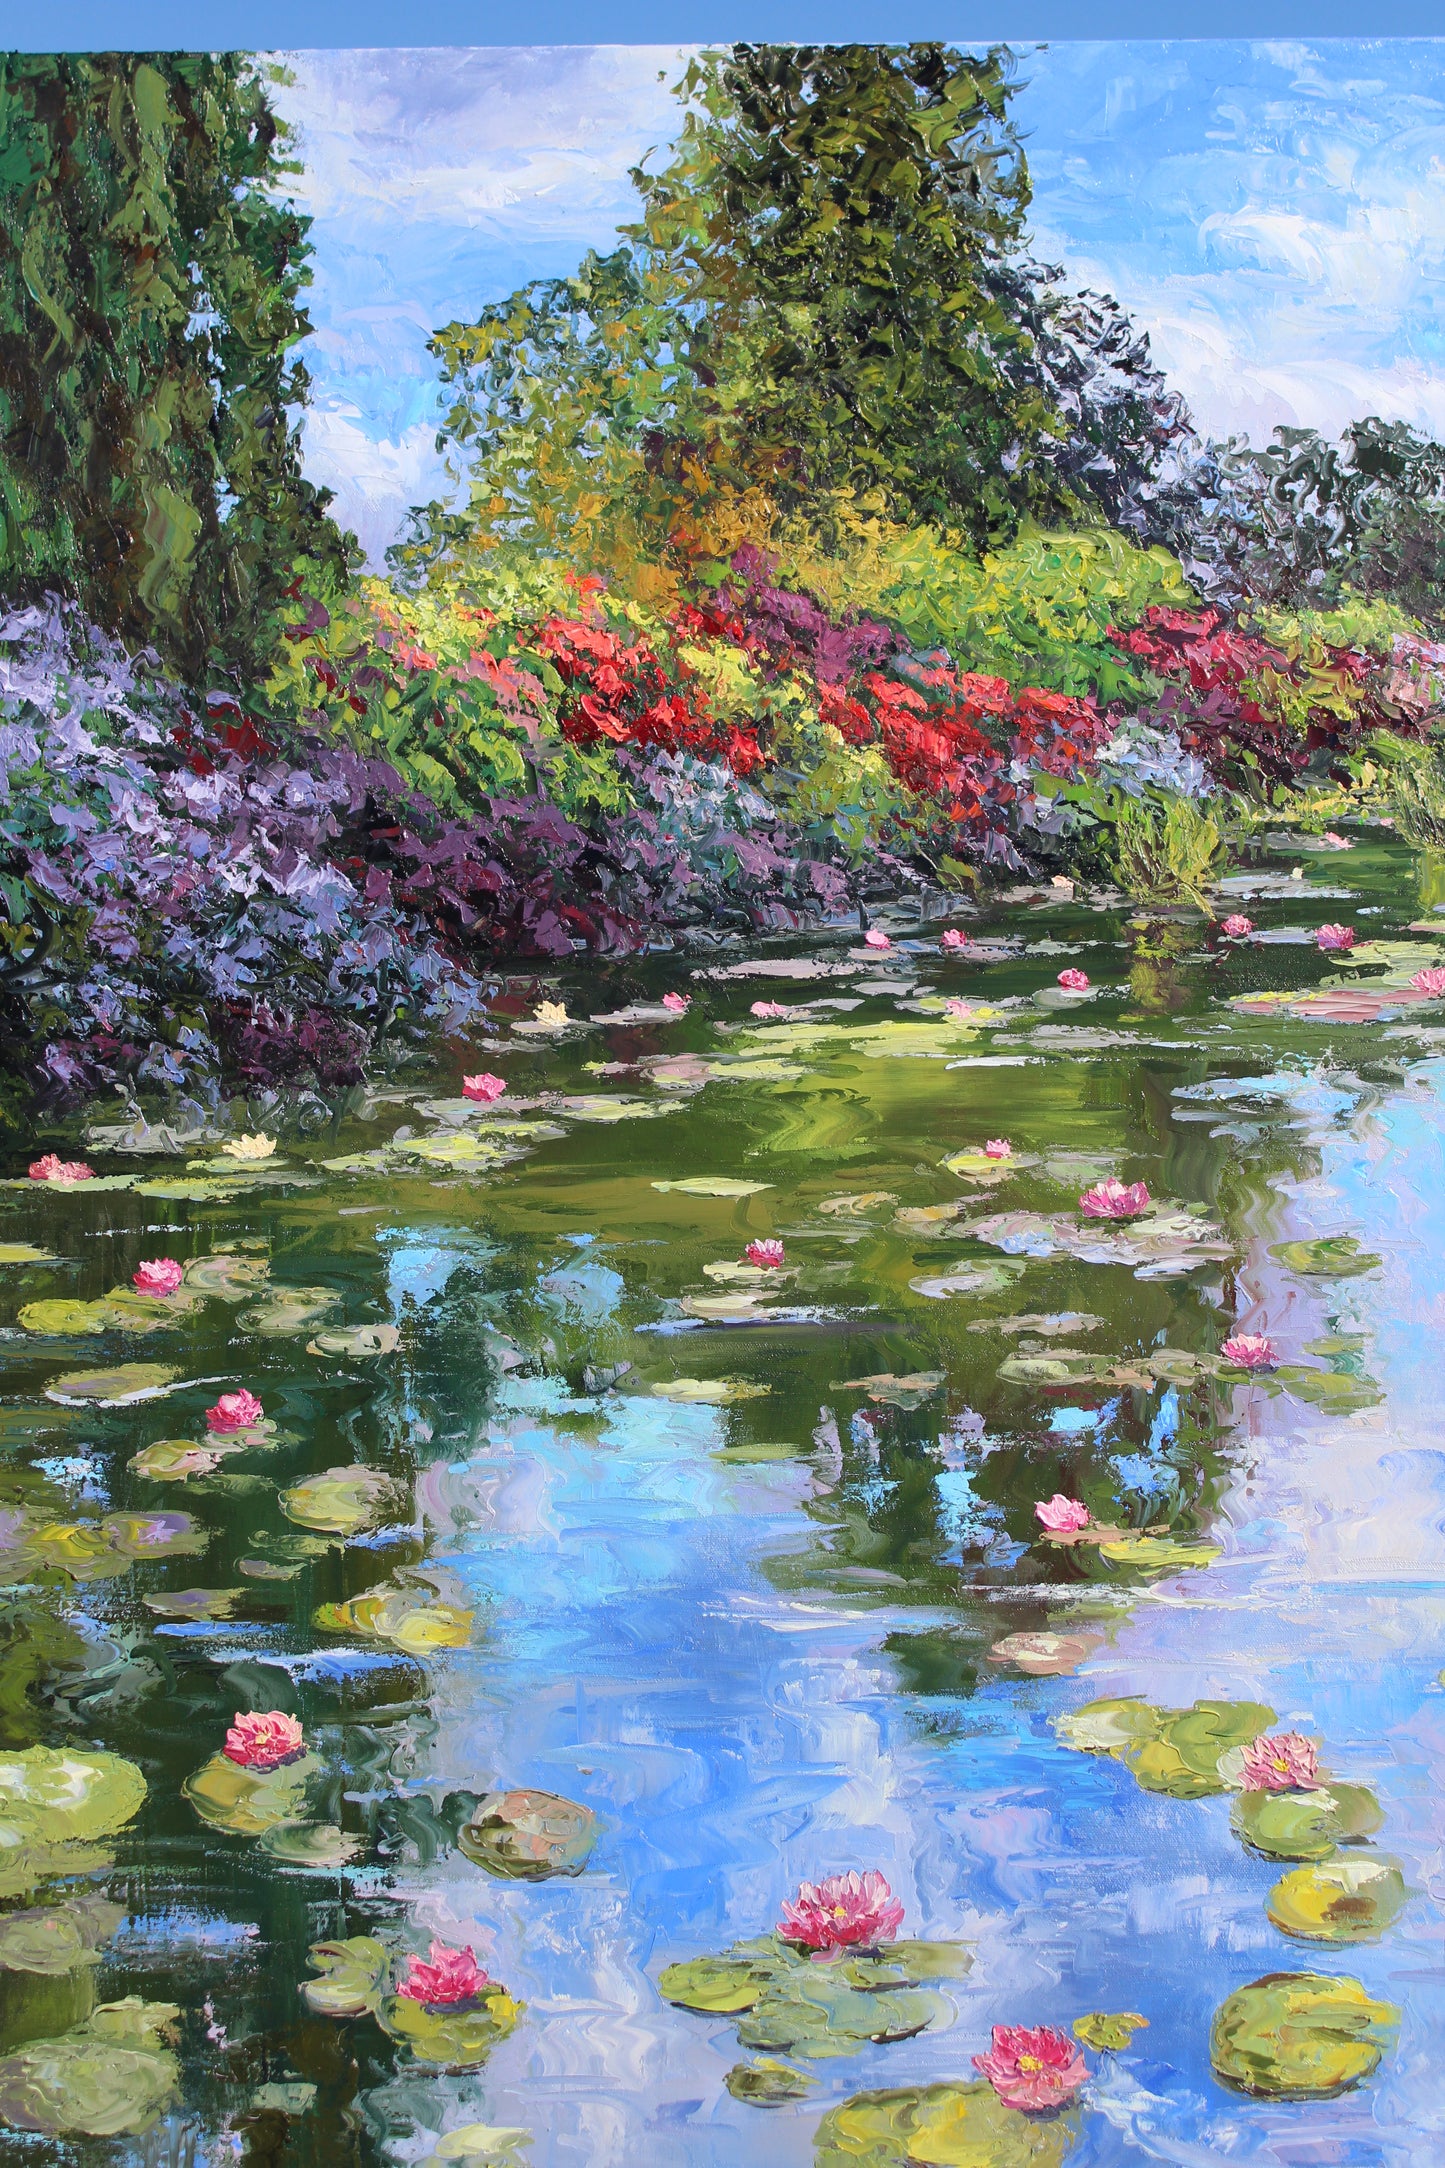 Extra Large Water Lily Painting, "An Ode To Monet", Garden Landscape Of Monet's Pond, 40" x 60" Oil On Canvas